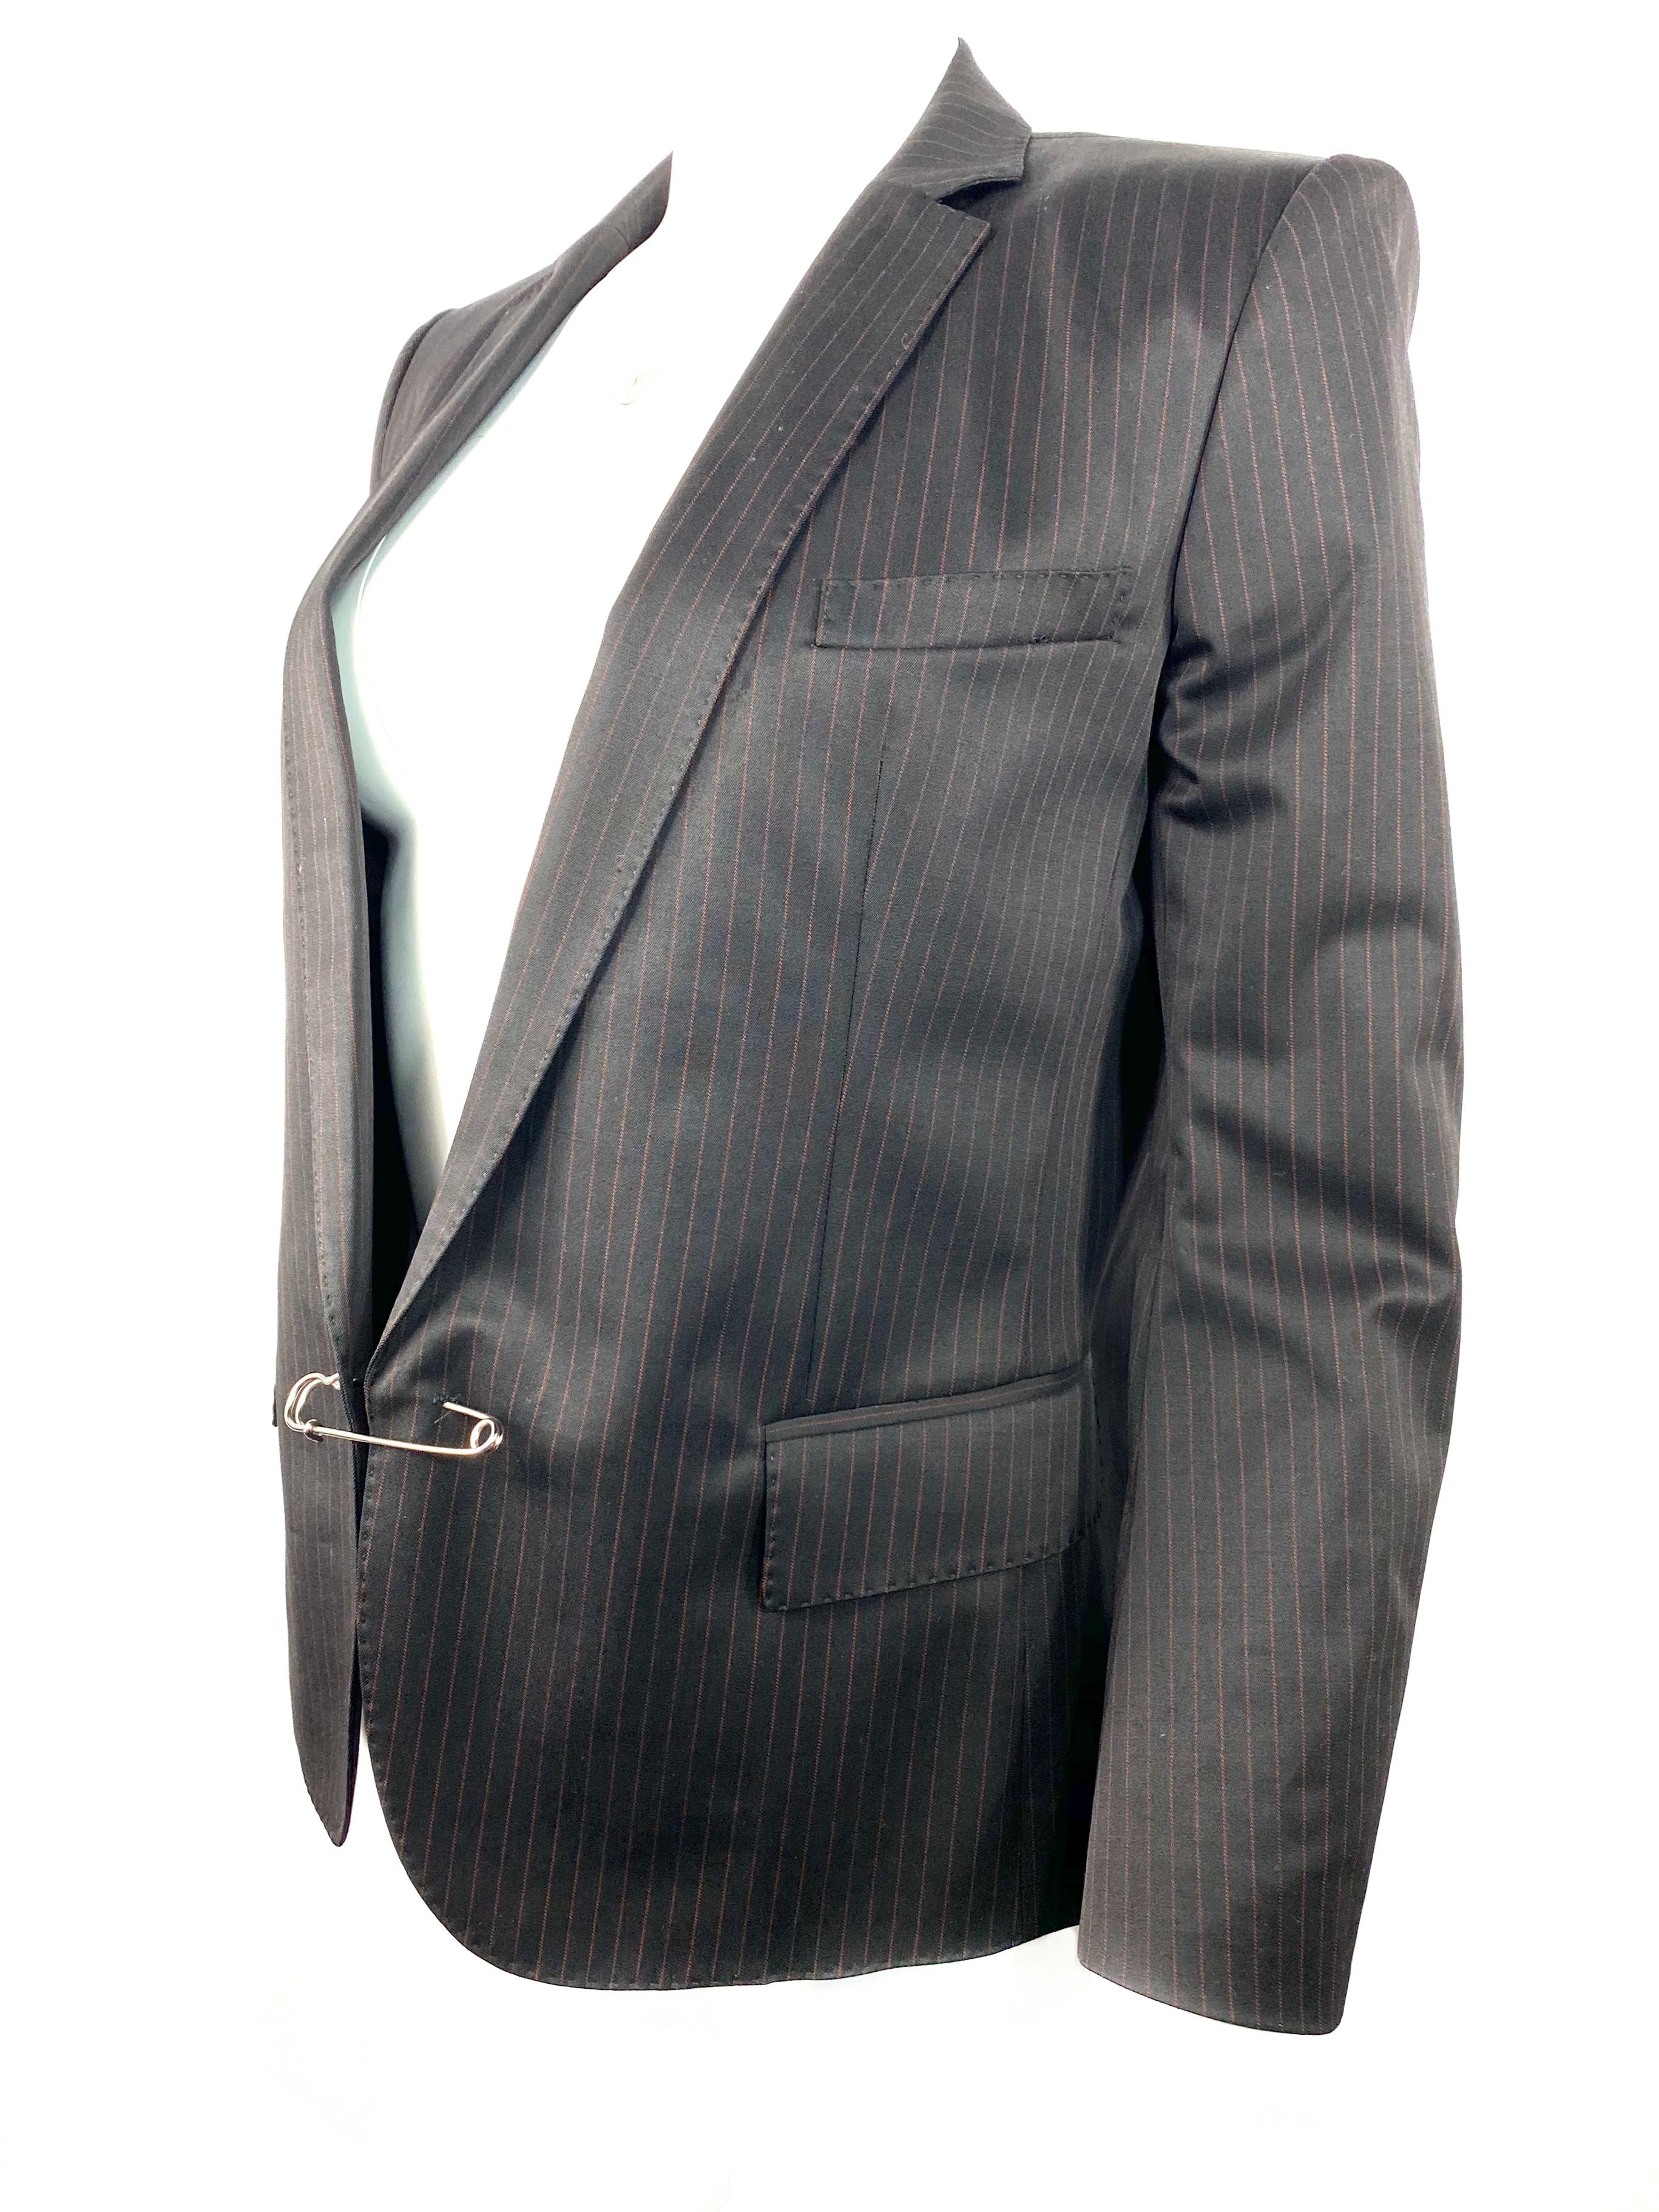 Product details:

Featuring back wool formal fit jacket with red thin vertical stripes and silver plated front safety pin closure.